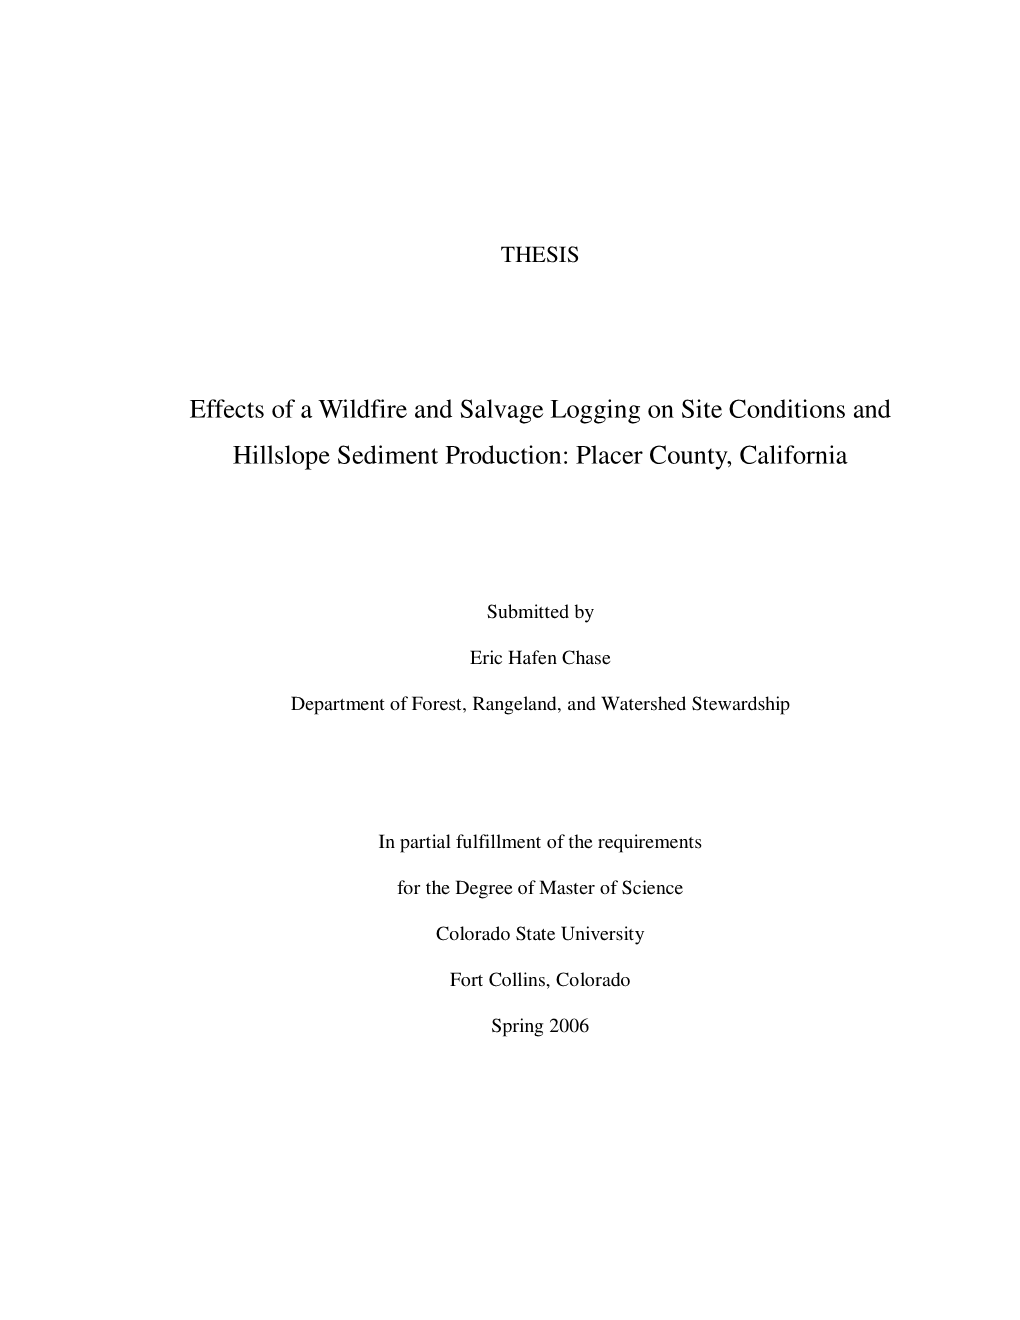 Effects of a Wildfire and Salvage Logging on Site Conditions and Hillslope Sediment Production: Placer County, California